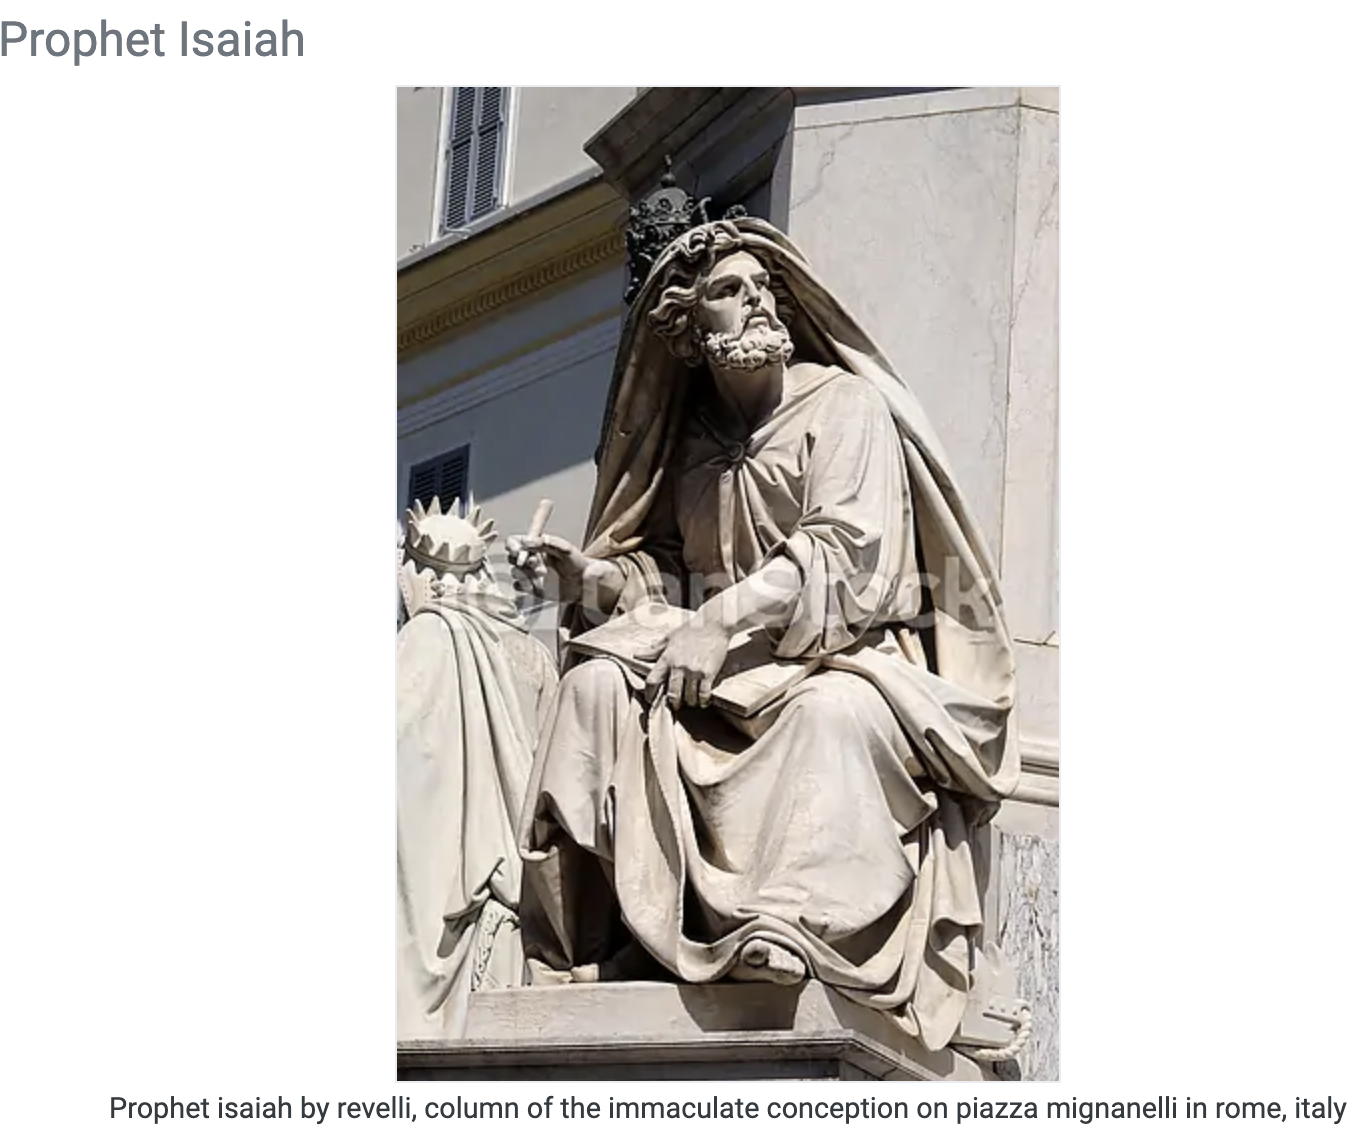 A statue of the Prophet Isaiah in Rome.